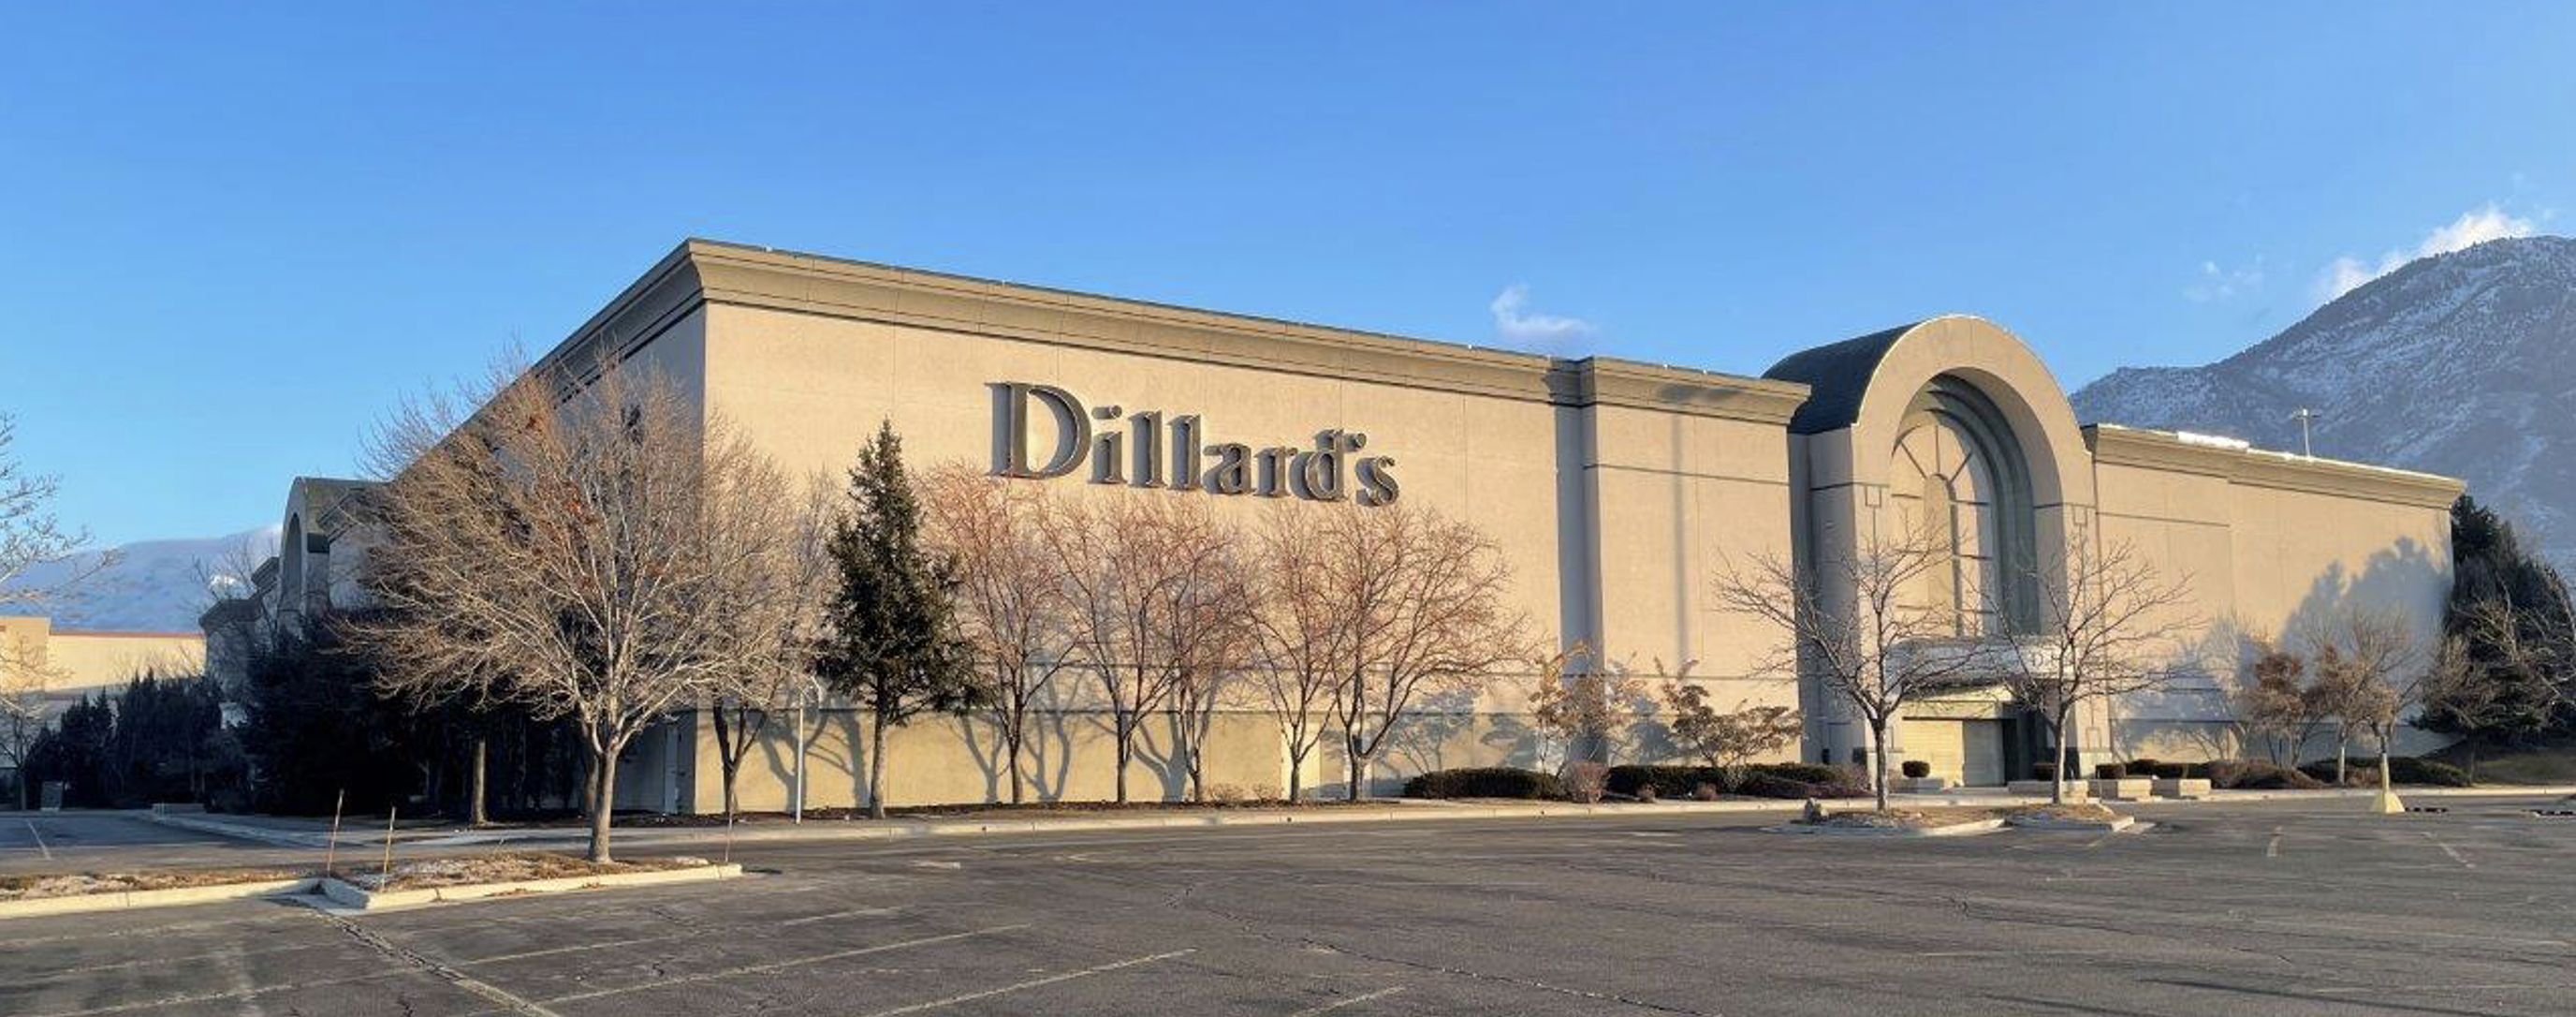 brixton-capital-announces-its-acquisition-of-the-dillards-building-at-provo-towne-center